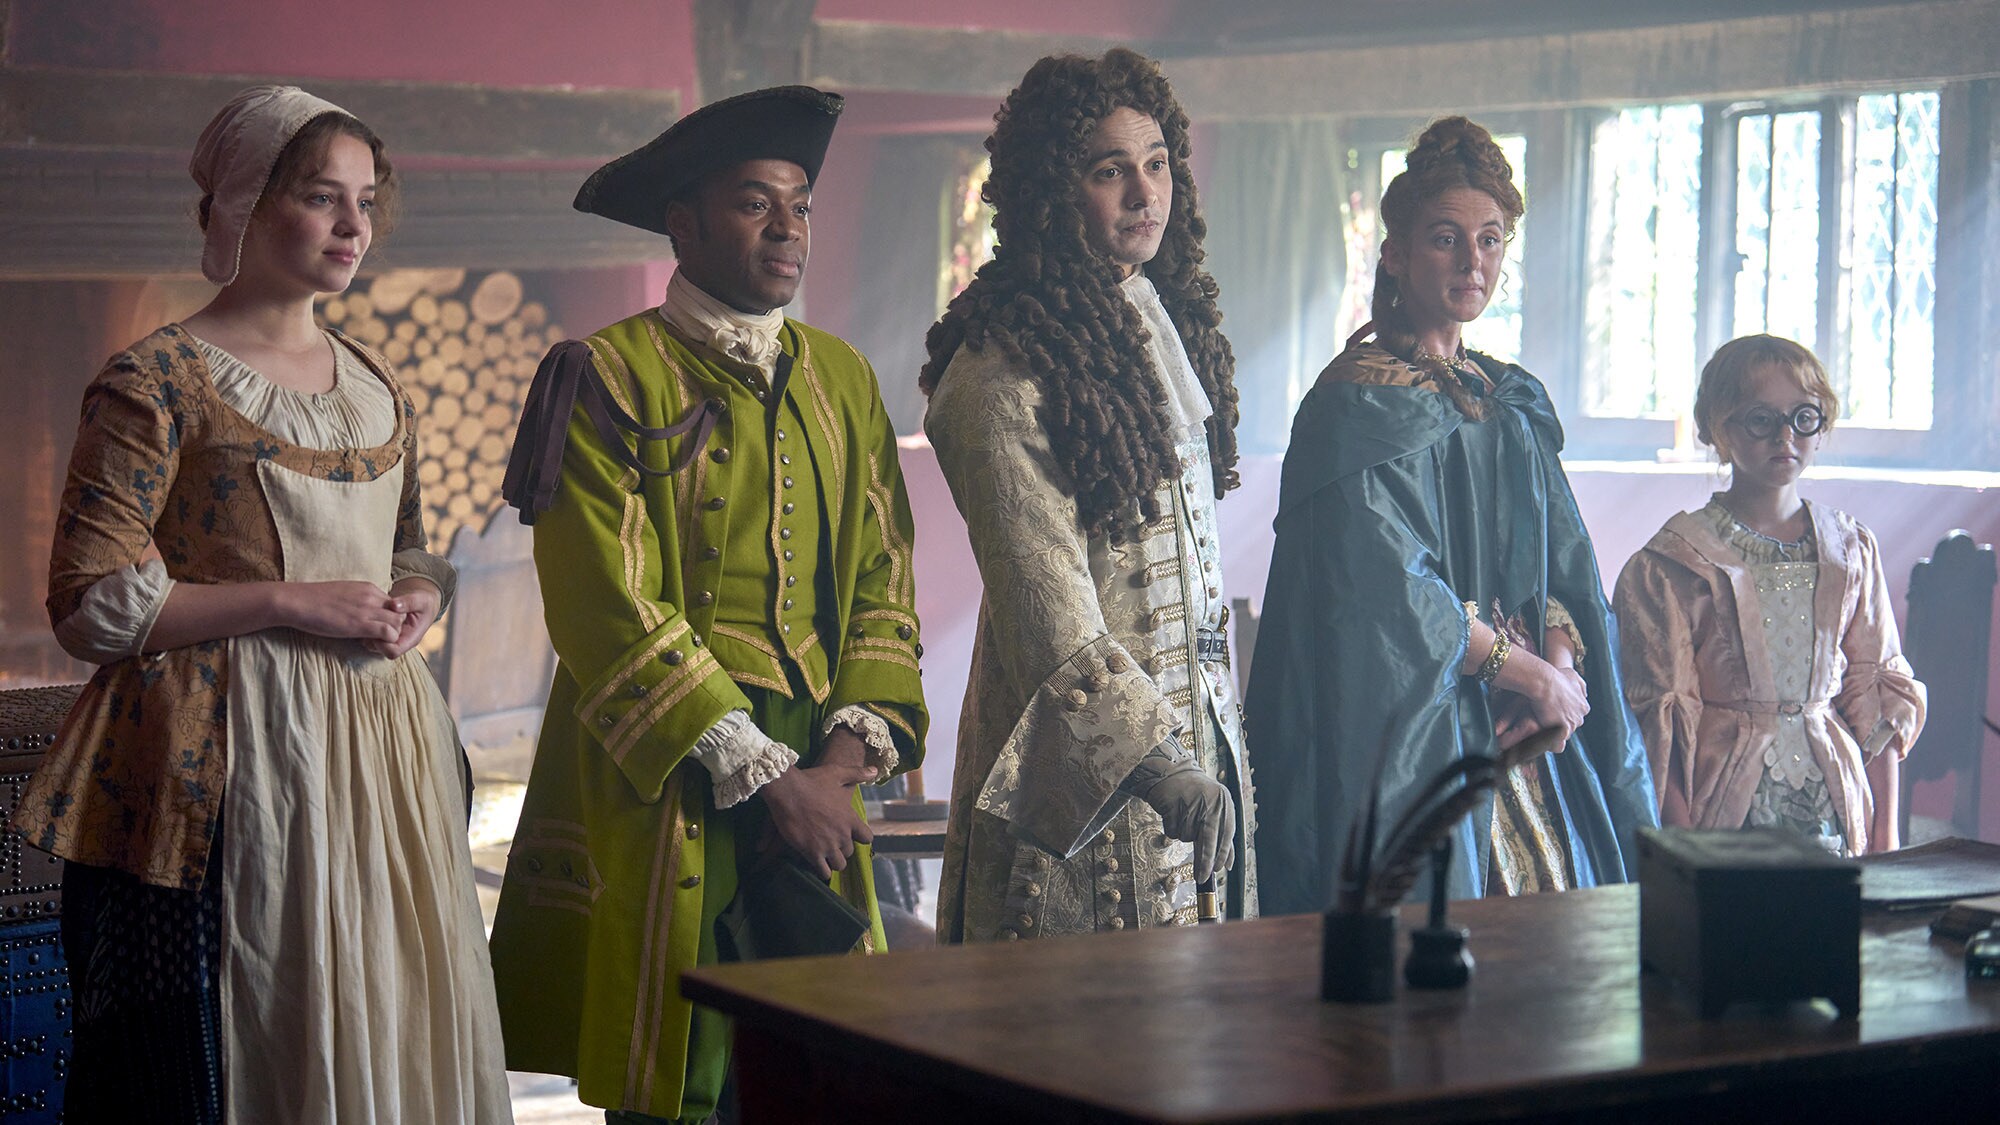 (L-R): Bo Bragason as Roxy Trotter, Ényì Okoronkwo as Rasselas, Frank Dillane as Charles Devereux, Louisa Harland as Nell Jackson, and Florence Keen as George Trotter in Disney's RENEGADE NELL, Season 1, exclusively on Disney+. Photo by Robert Viglasky. © 2024 Disney Enterprises, Inc. All Rights Reserved.